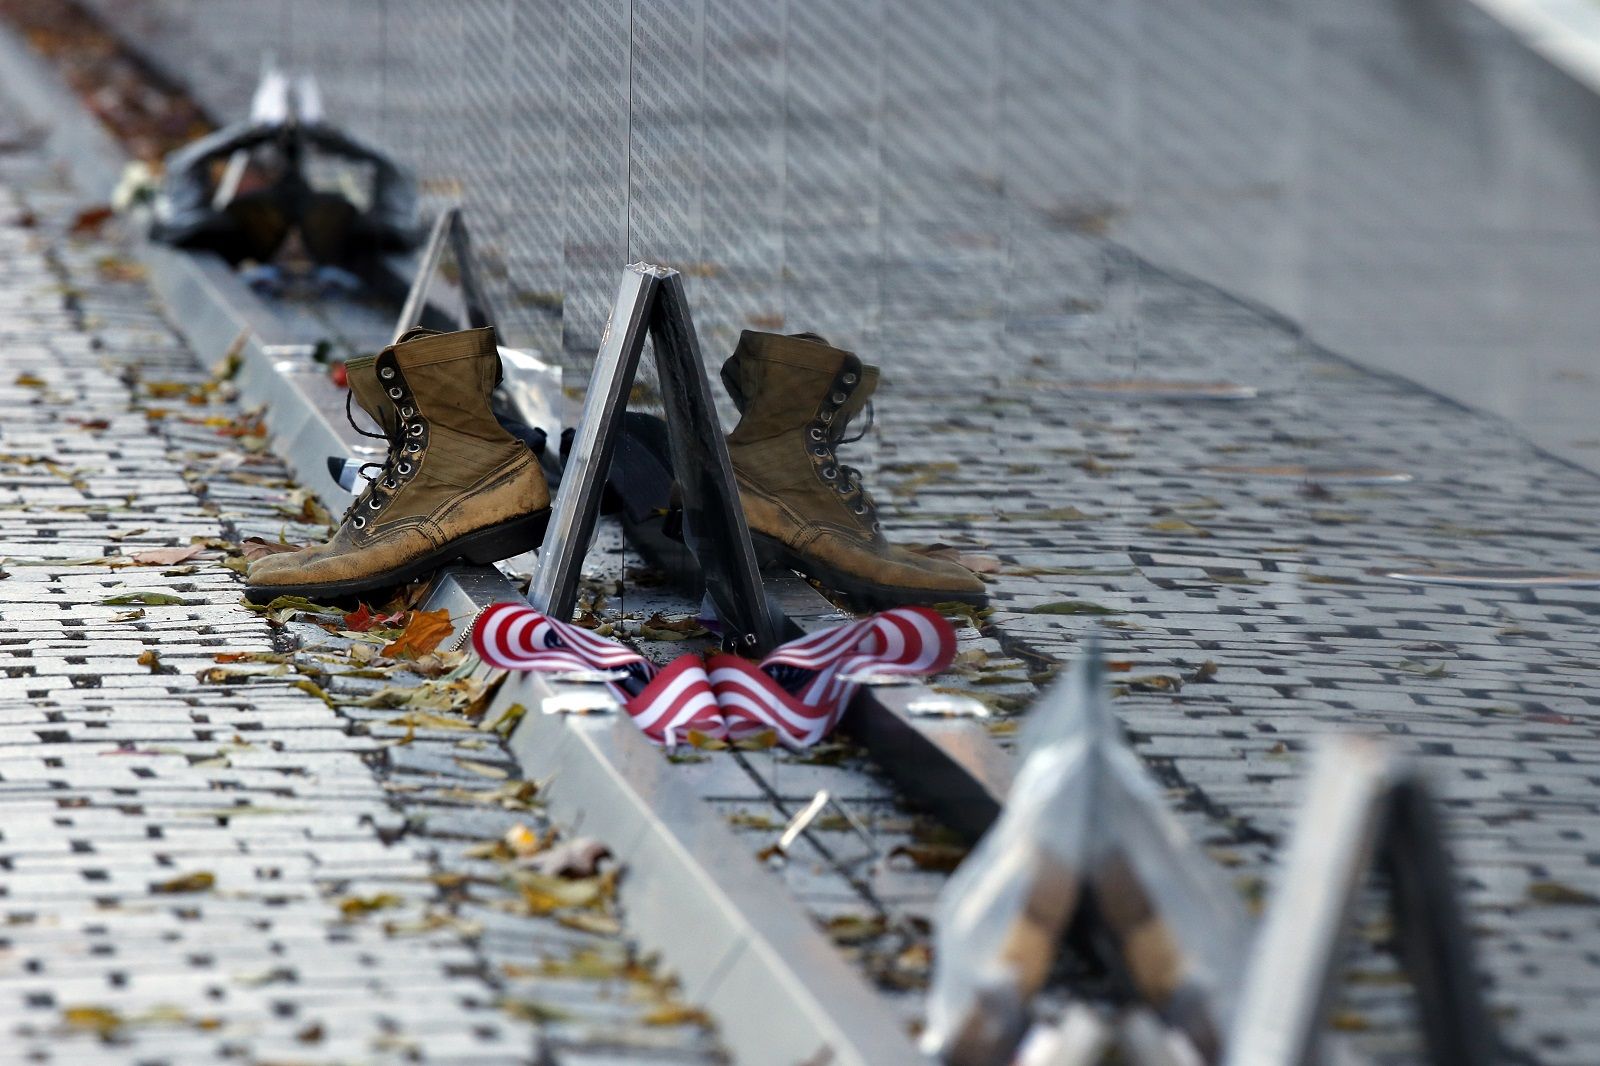 Mementos including a worn pair of boots, have been replaced after the wall was cleaned at the Vietnam Veterans Memorial on Veterans Day, Saturday, Nov. 11, 2017 in Washington. (AP Photo/Alex Brandon)